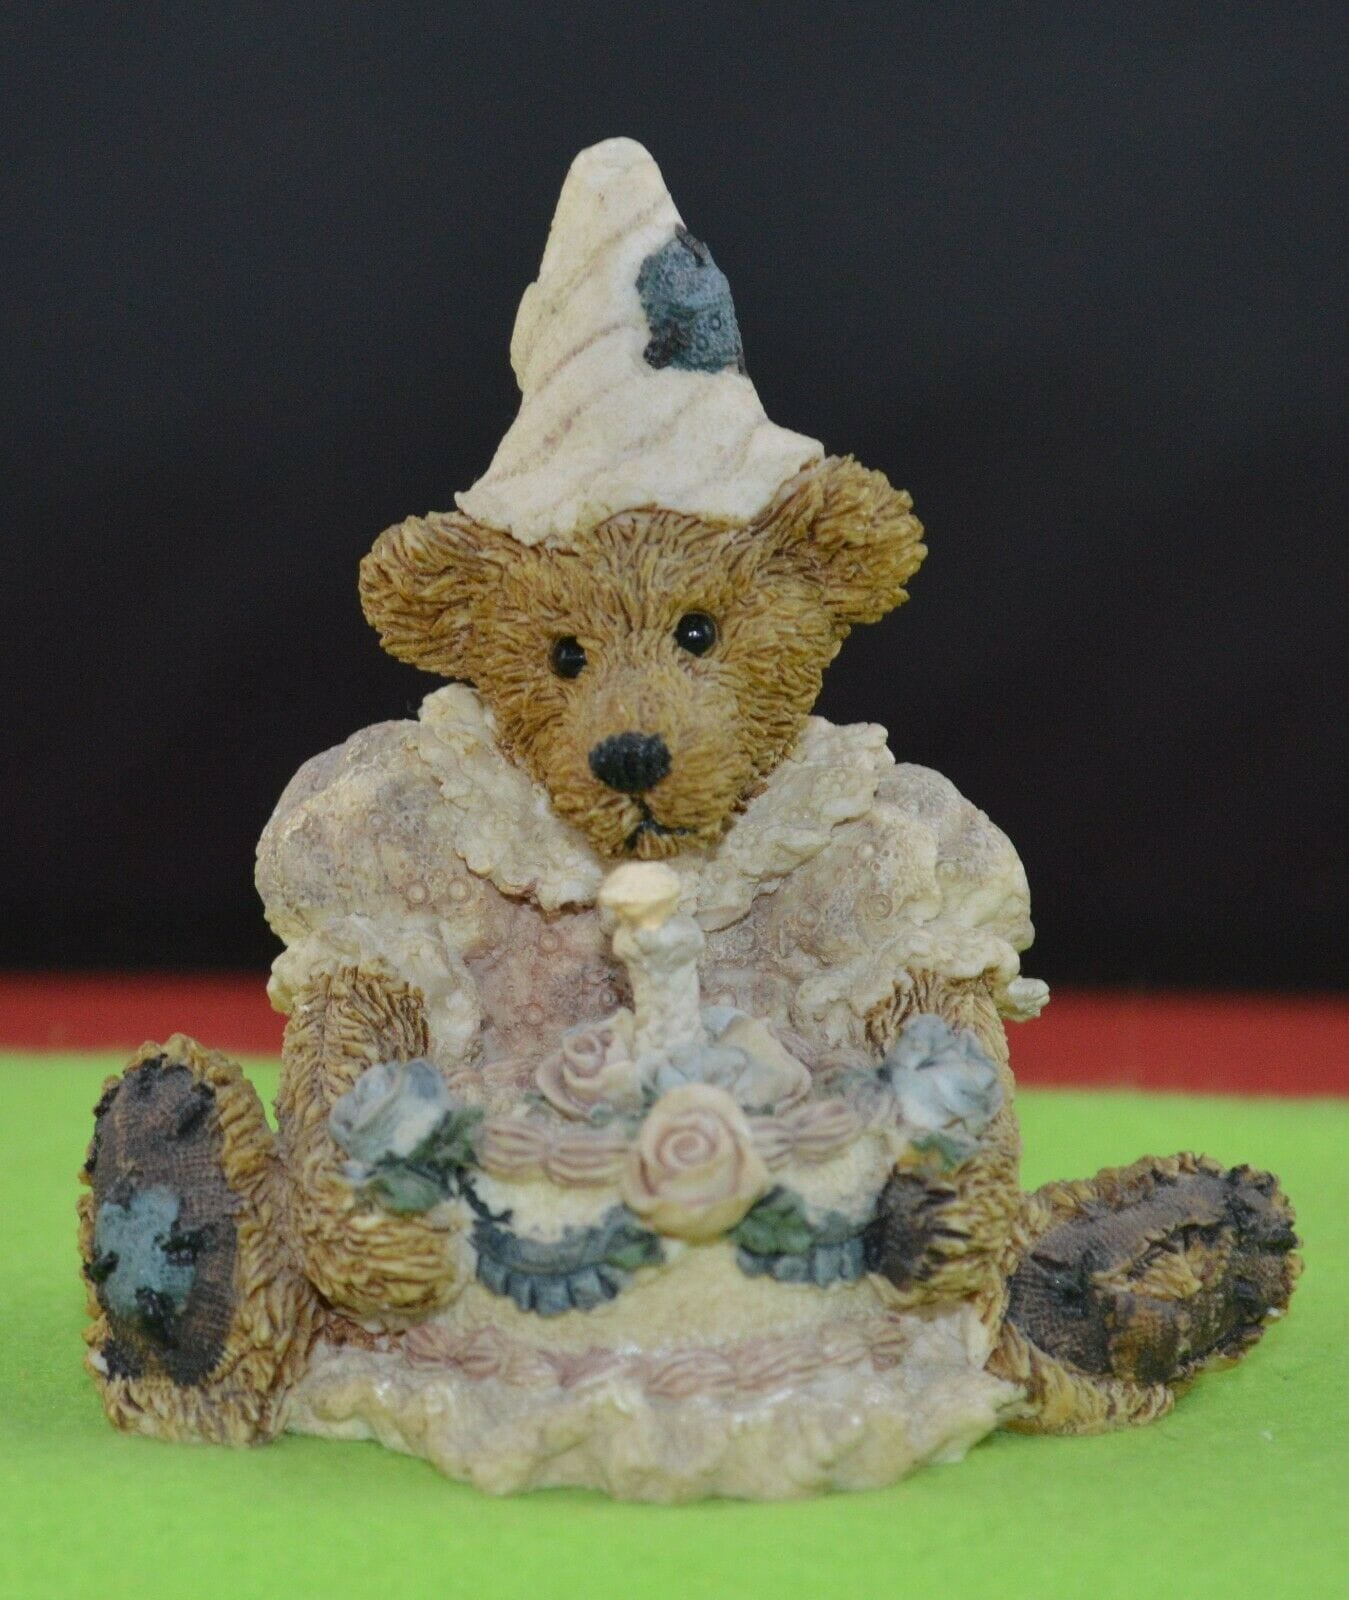 BOYDS BEARS BAILEY'S BIRTHDAY BEAR(PREVIOUSLY OWNED) GOOD CONDITION - TMD167207